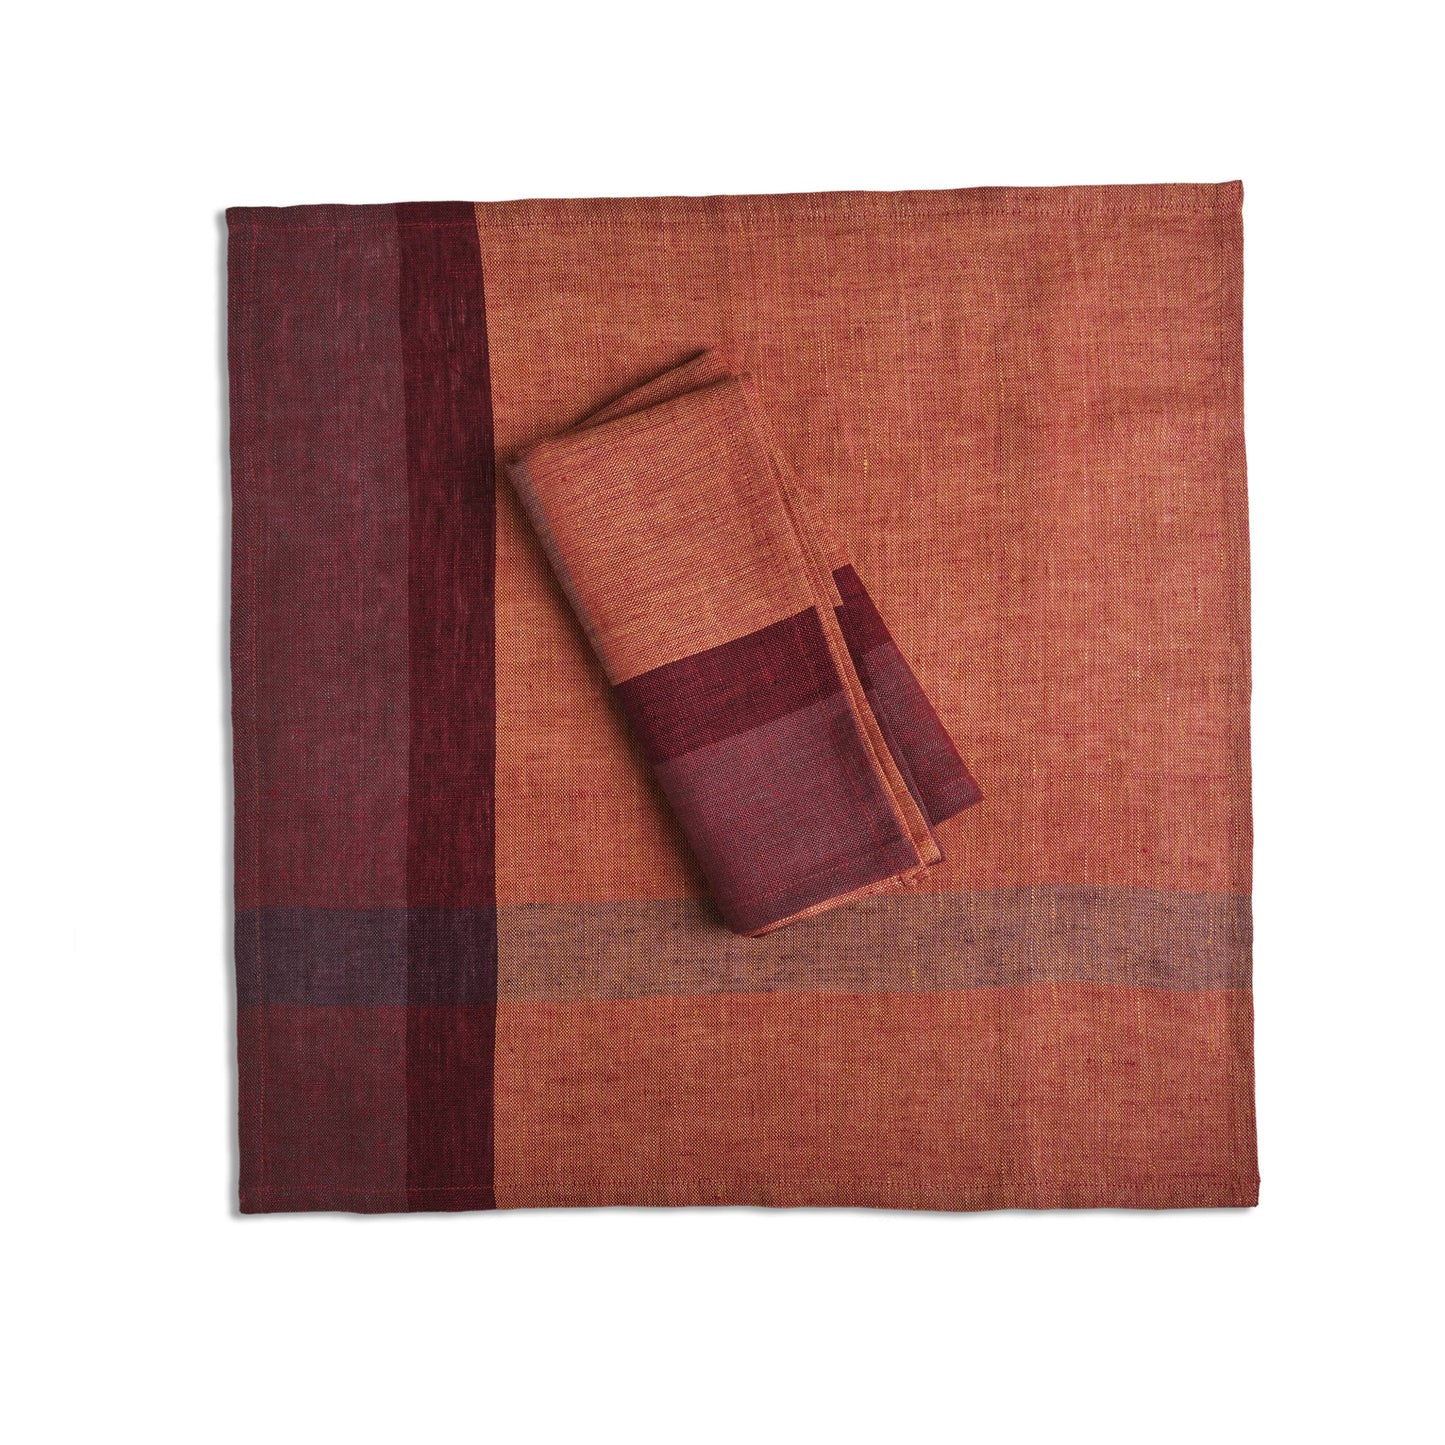 ROSE WINE Handwoven Flax Linen Napkins (set of 2) from Sustainable Threads